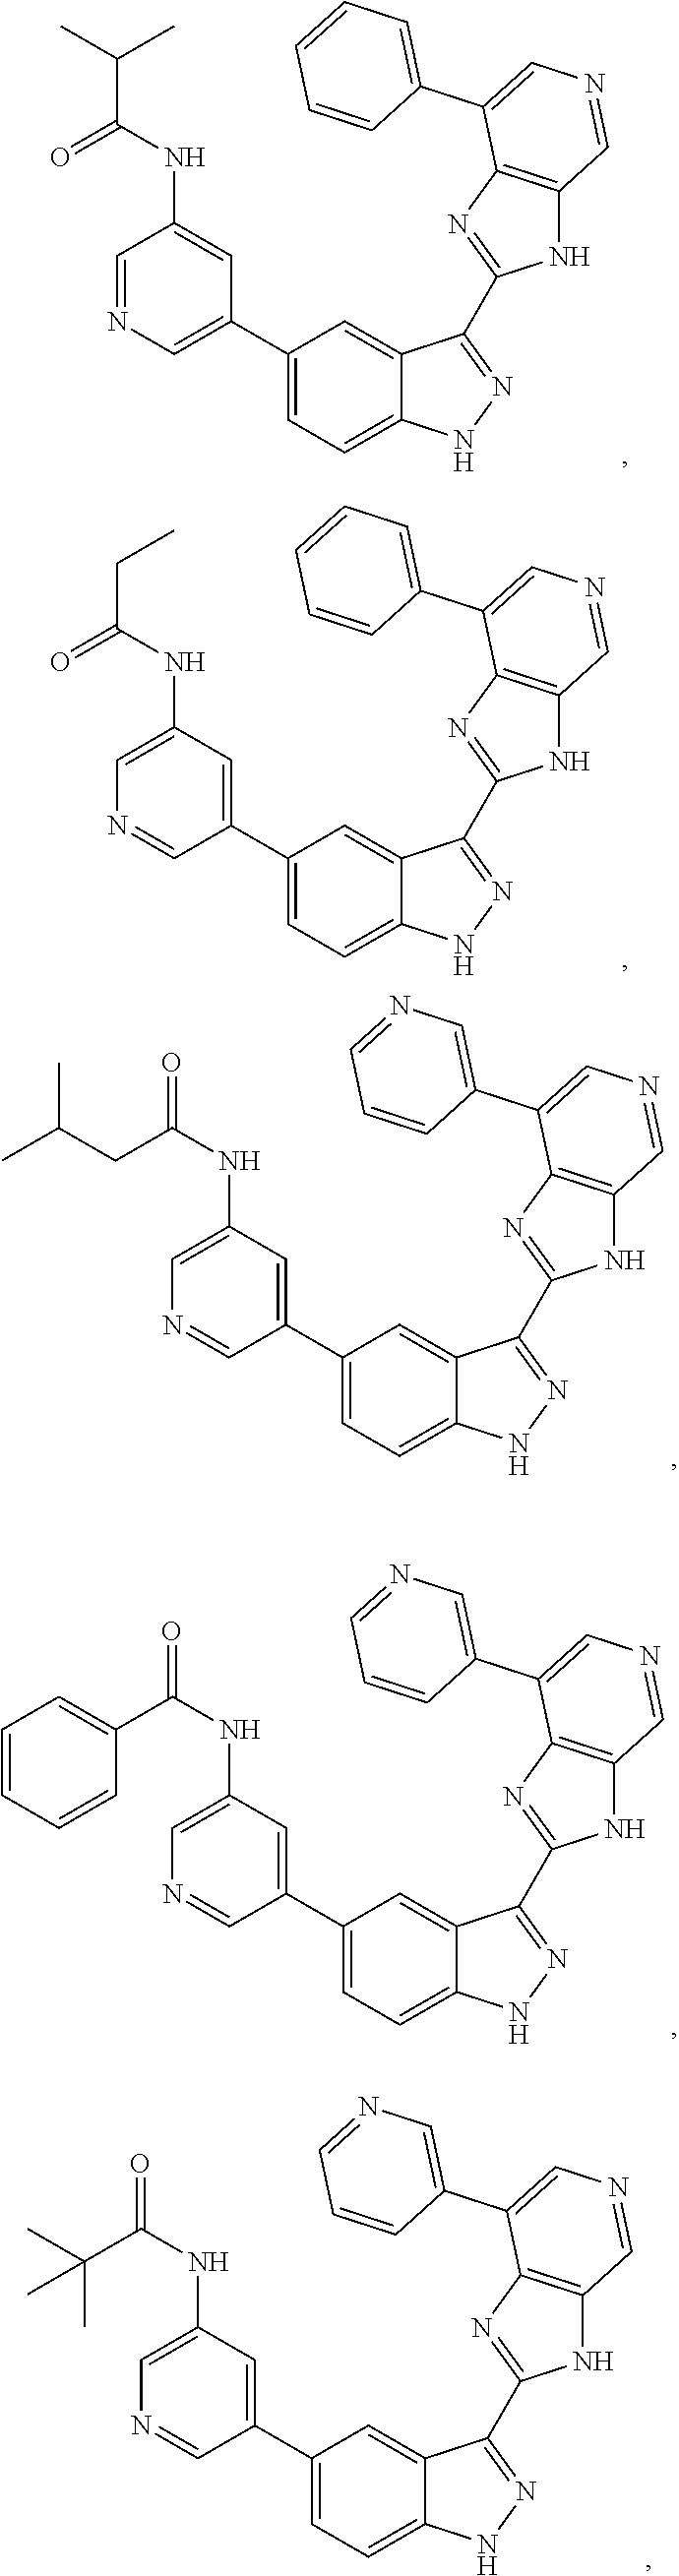 Indazole inhibitors of the wnt signal pathway and therapeutic uses thereof